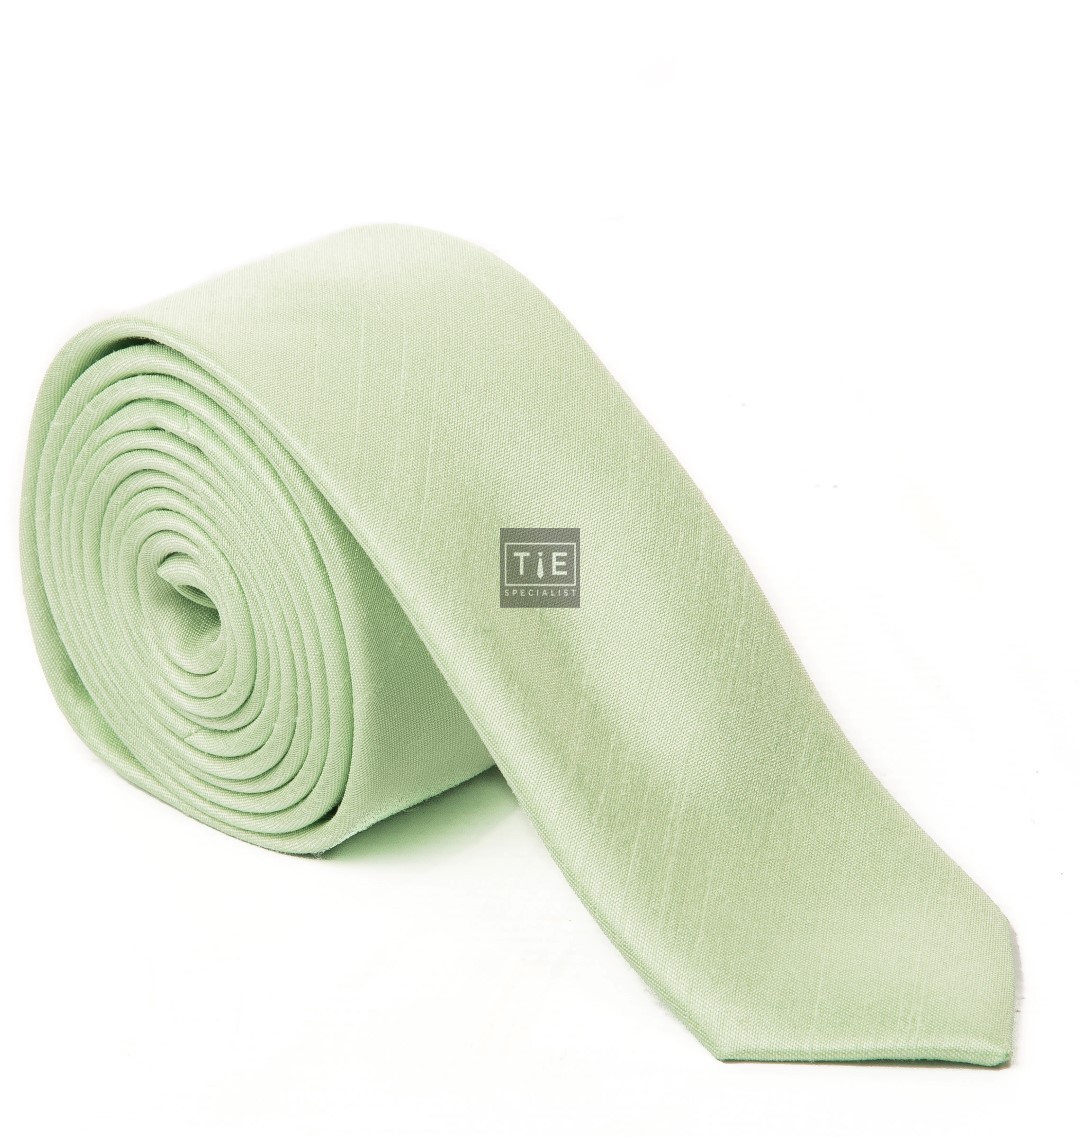 Apple Shantung Tie with Matching Pocket Hankie